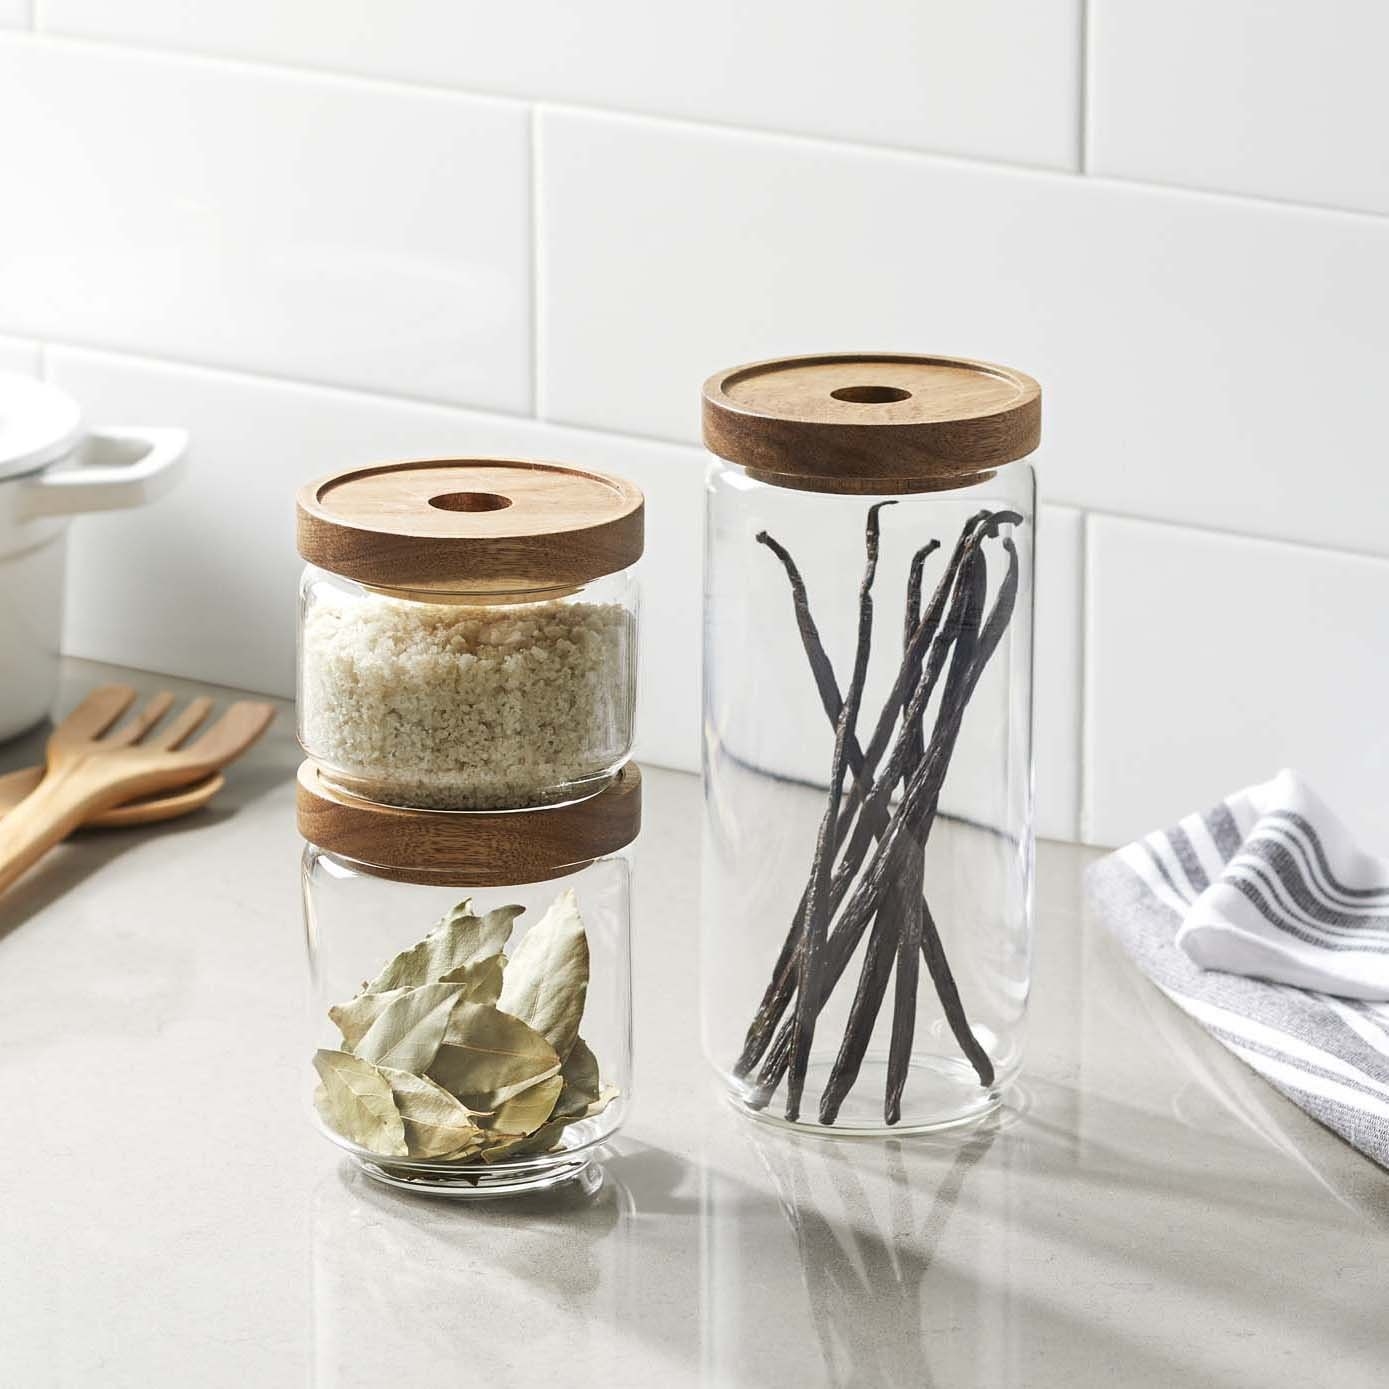 1 tall and 2 shorter glass containers with wooden tops